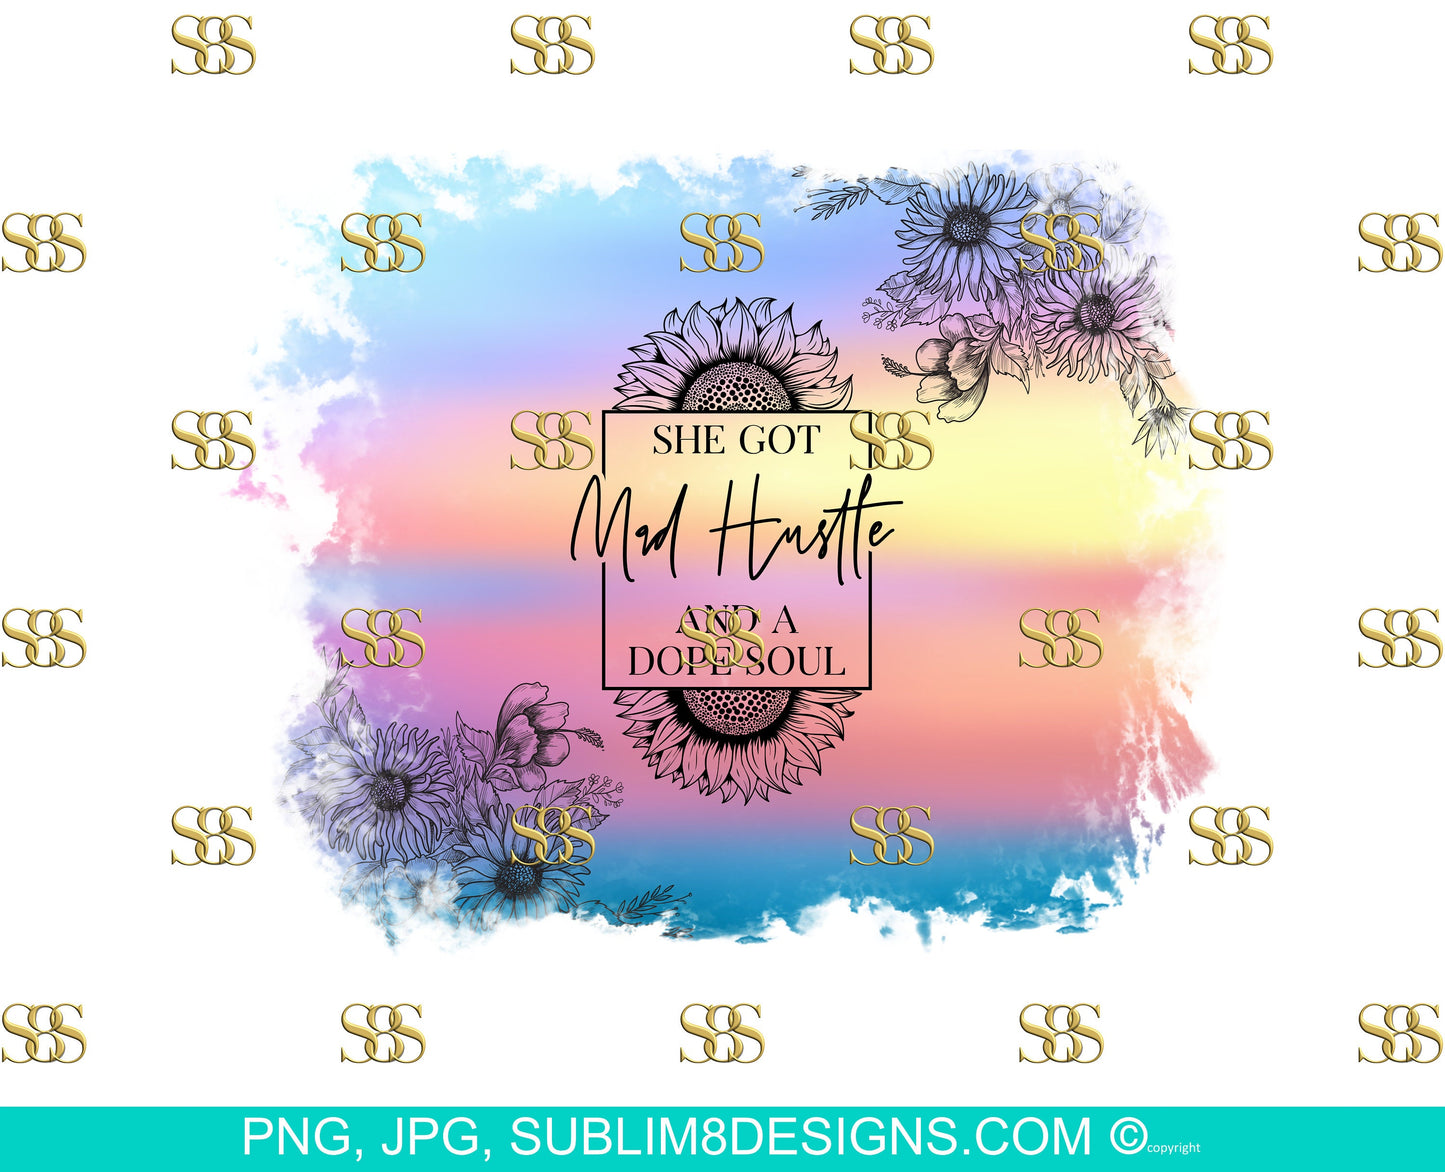 She Got A Mad Hustle And A Dope Soul Sublimation T-shirt Design PNG and JPEG ONLY